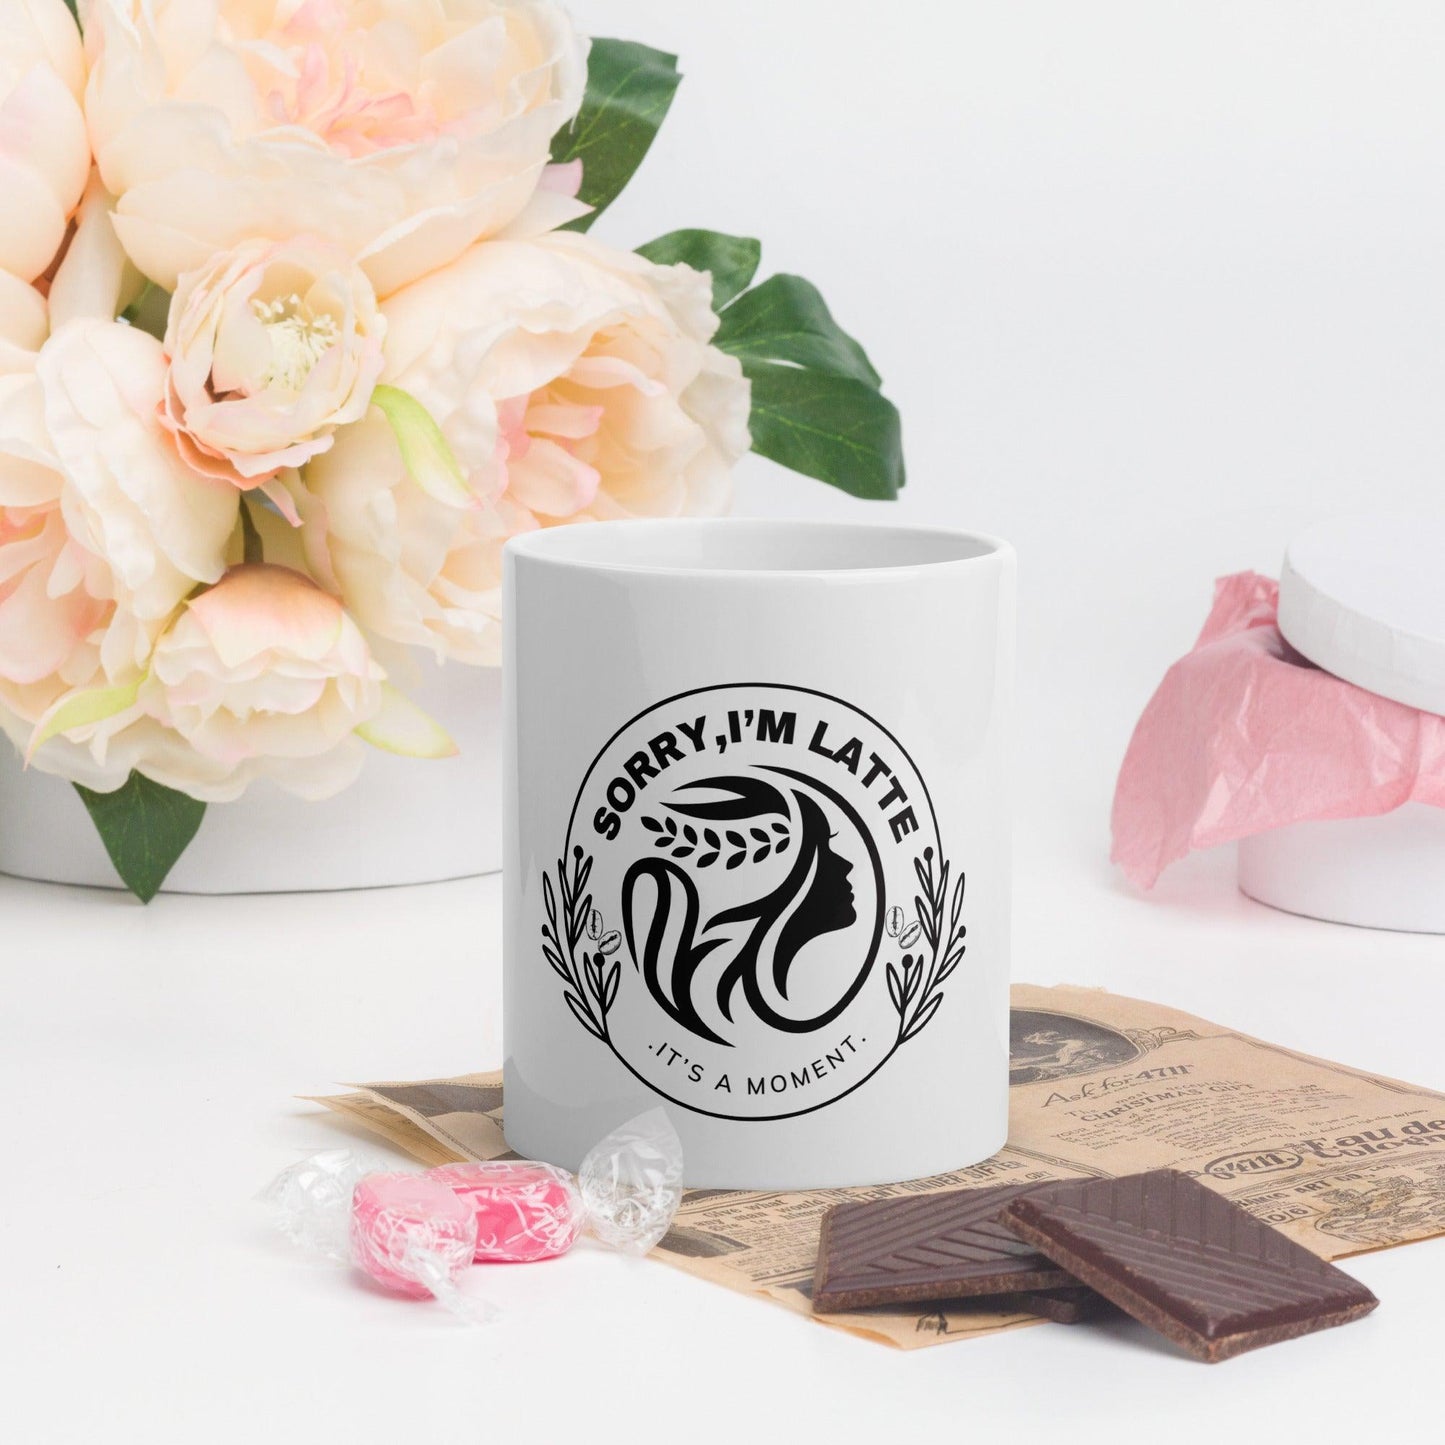 Luxury White Glossy Handmade Cup Gift - COFFEEBRE